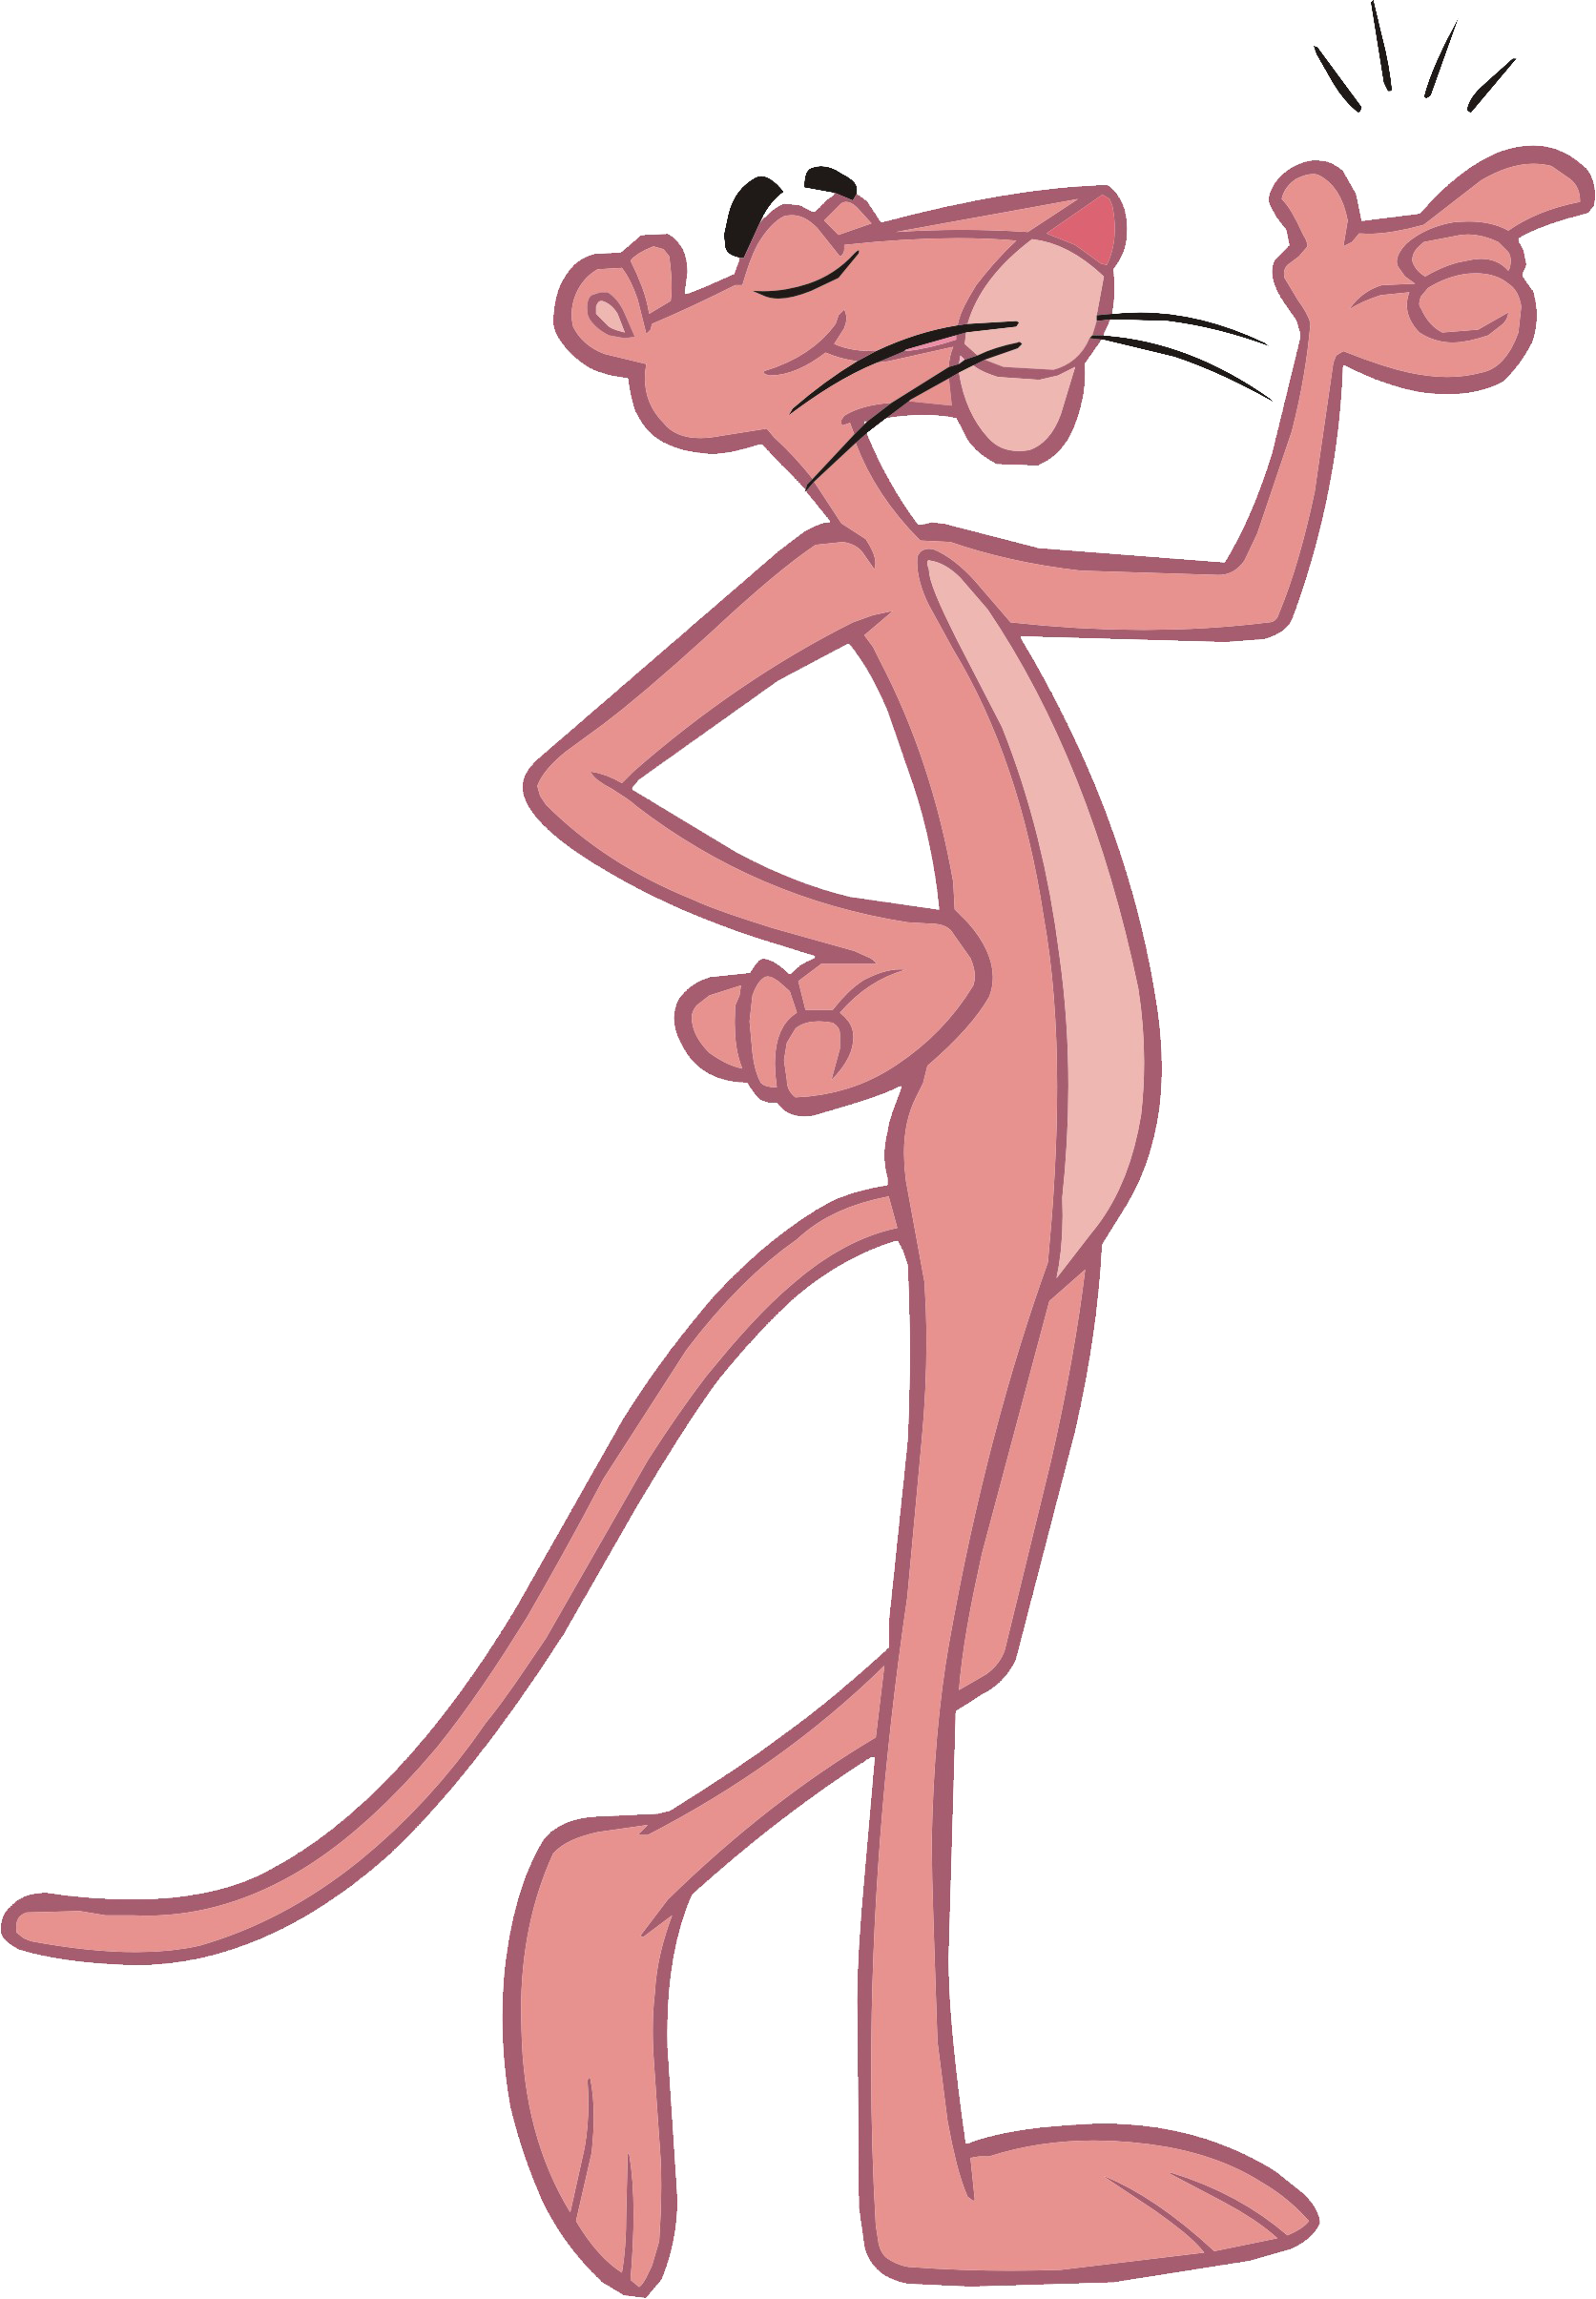 Youtube The Pink Panther Film Cartoon - Pink Panther Think (1673x2410)